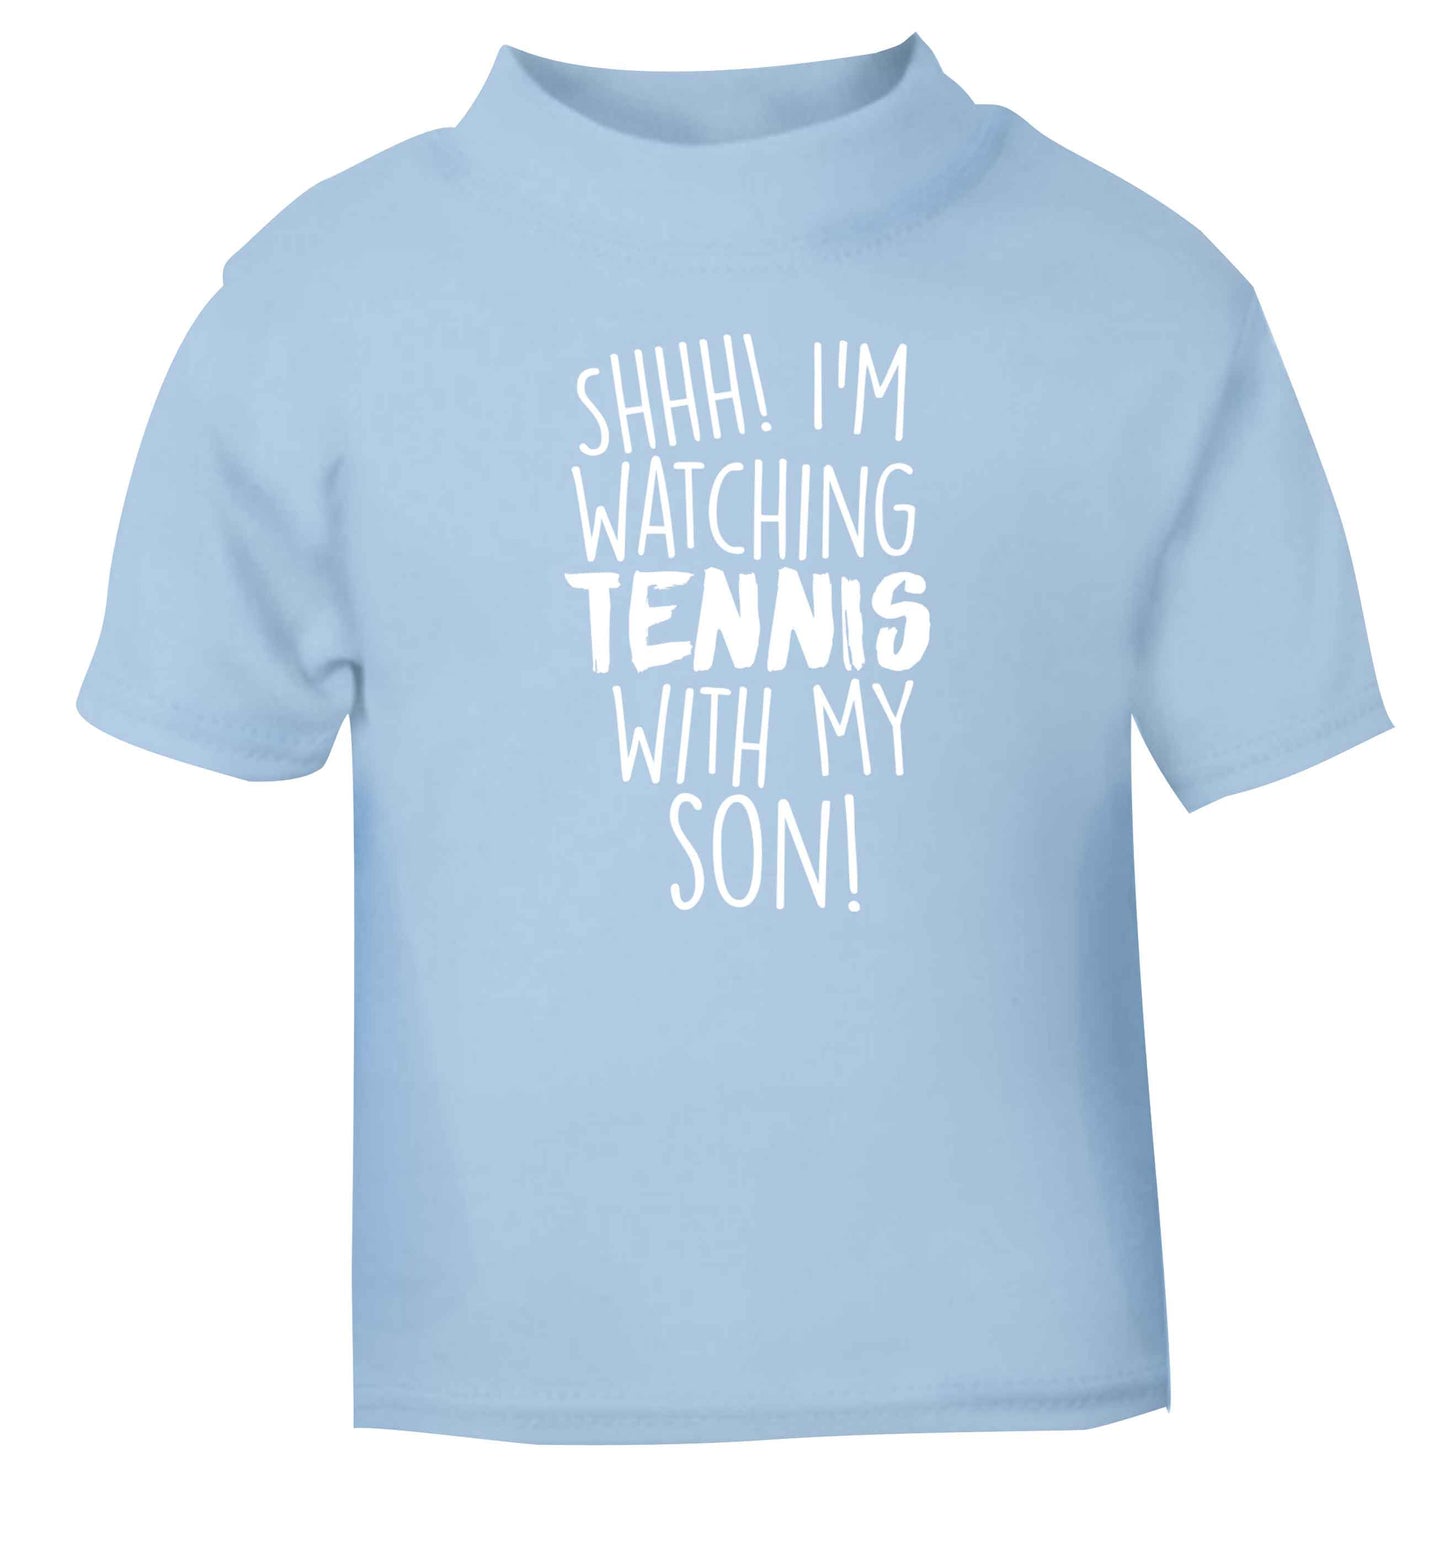 Shh! I'm watching tennis with my son! light blue Baby Toddler Tshirt 2 Years